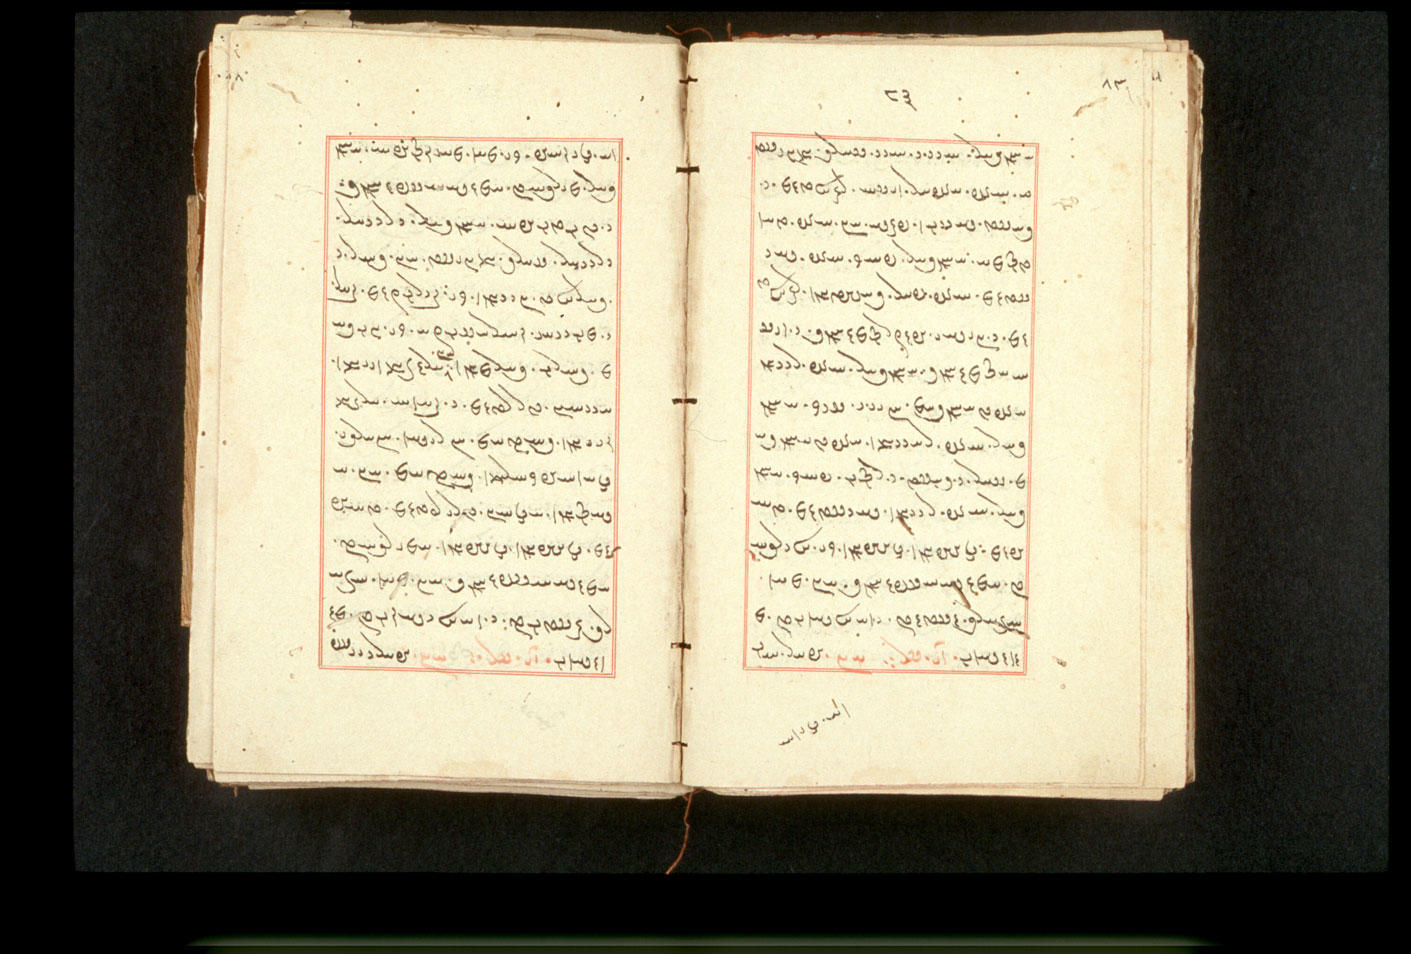 Folios 83v (right) and 84r (left)